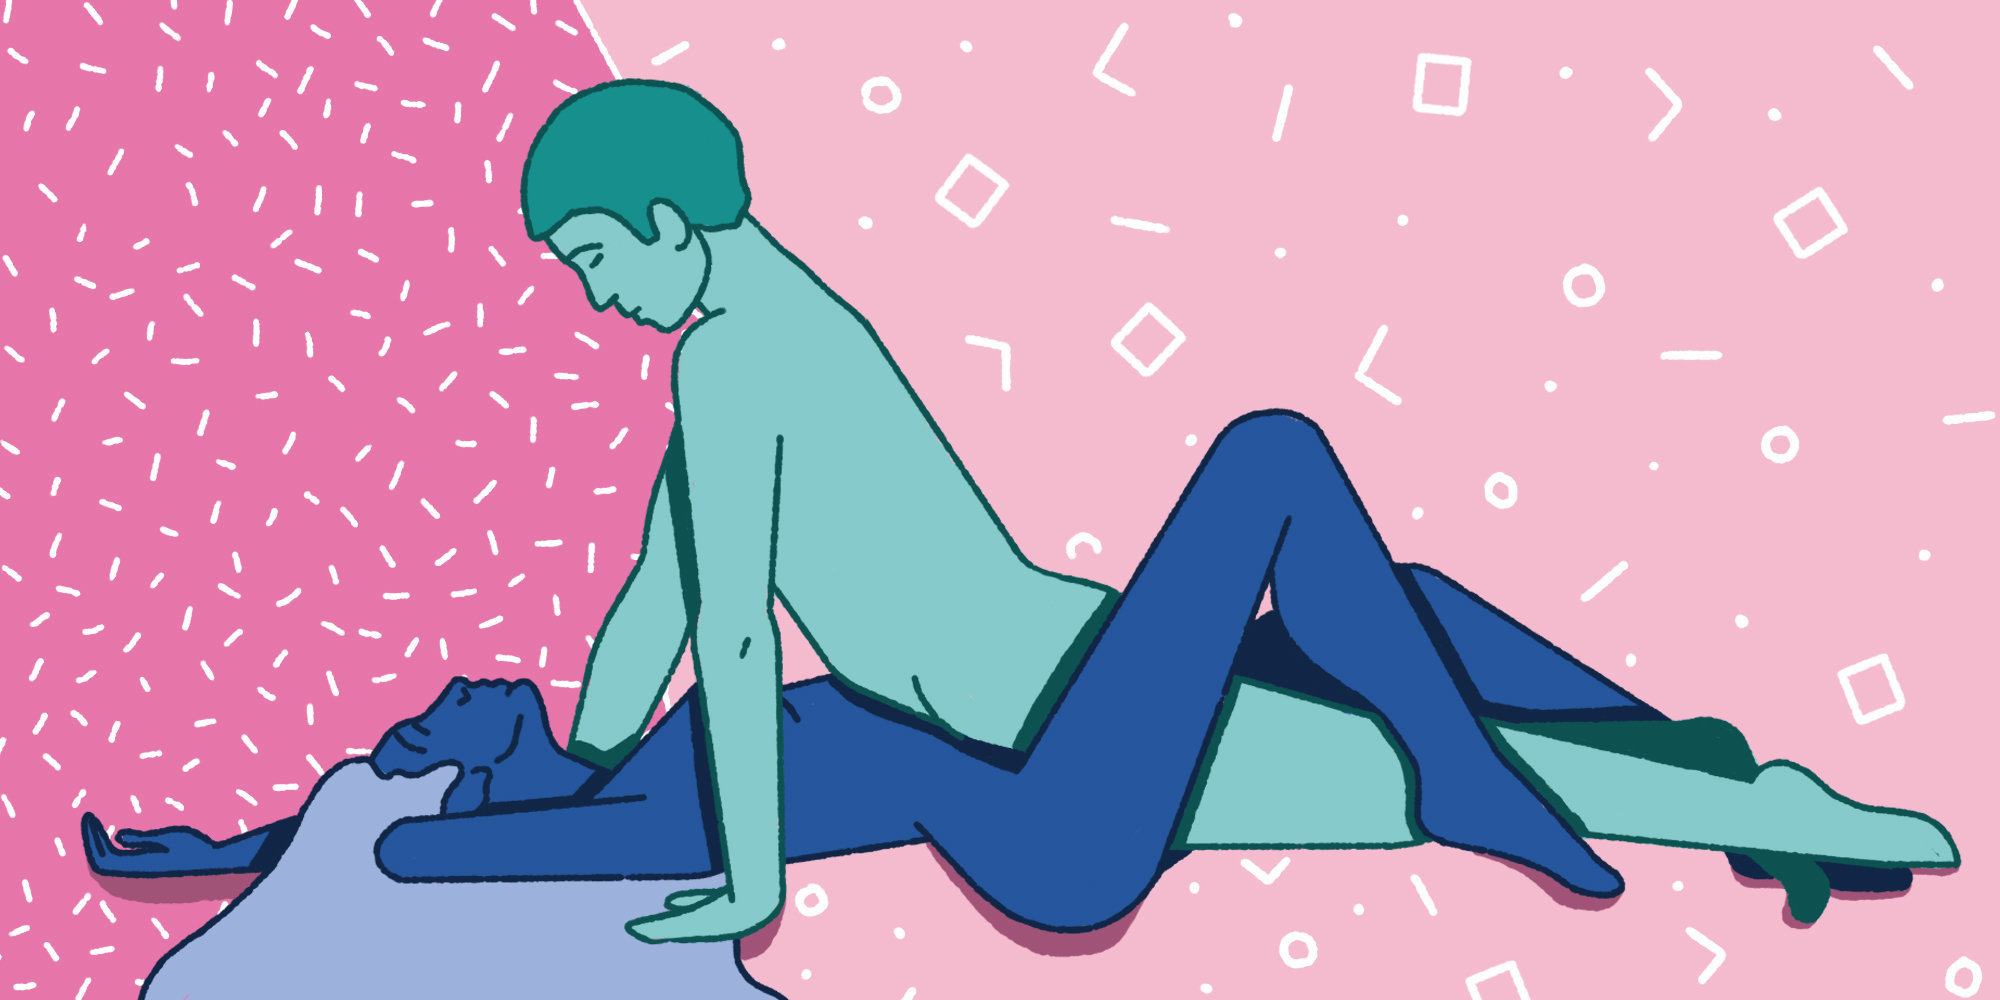 Probably this position was the first sex position in the world